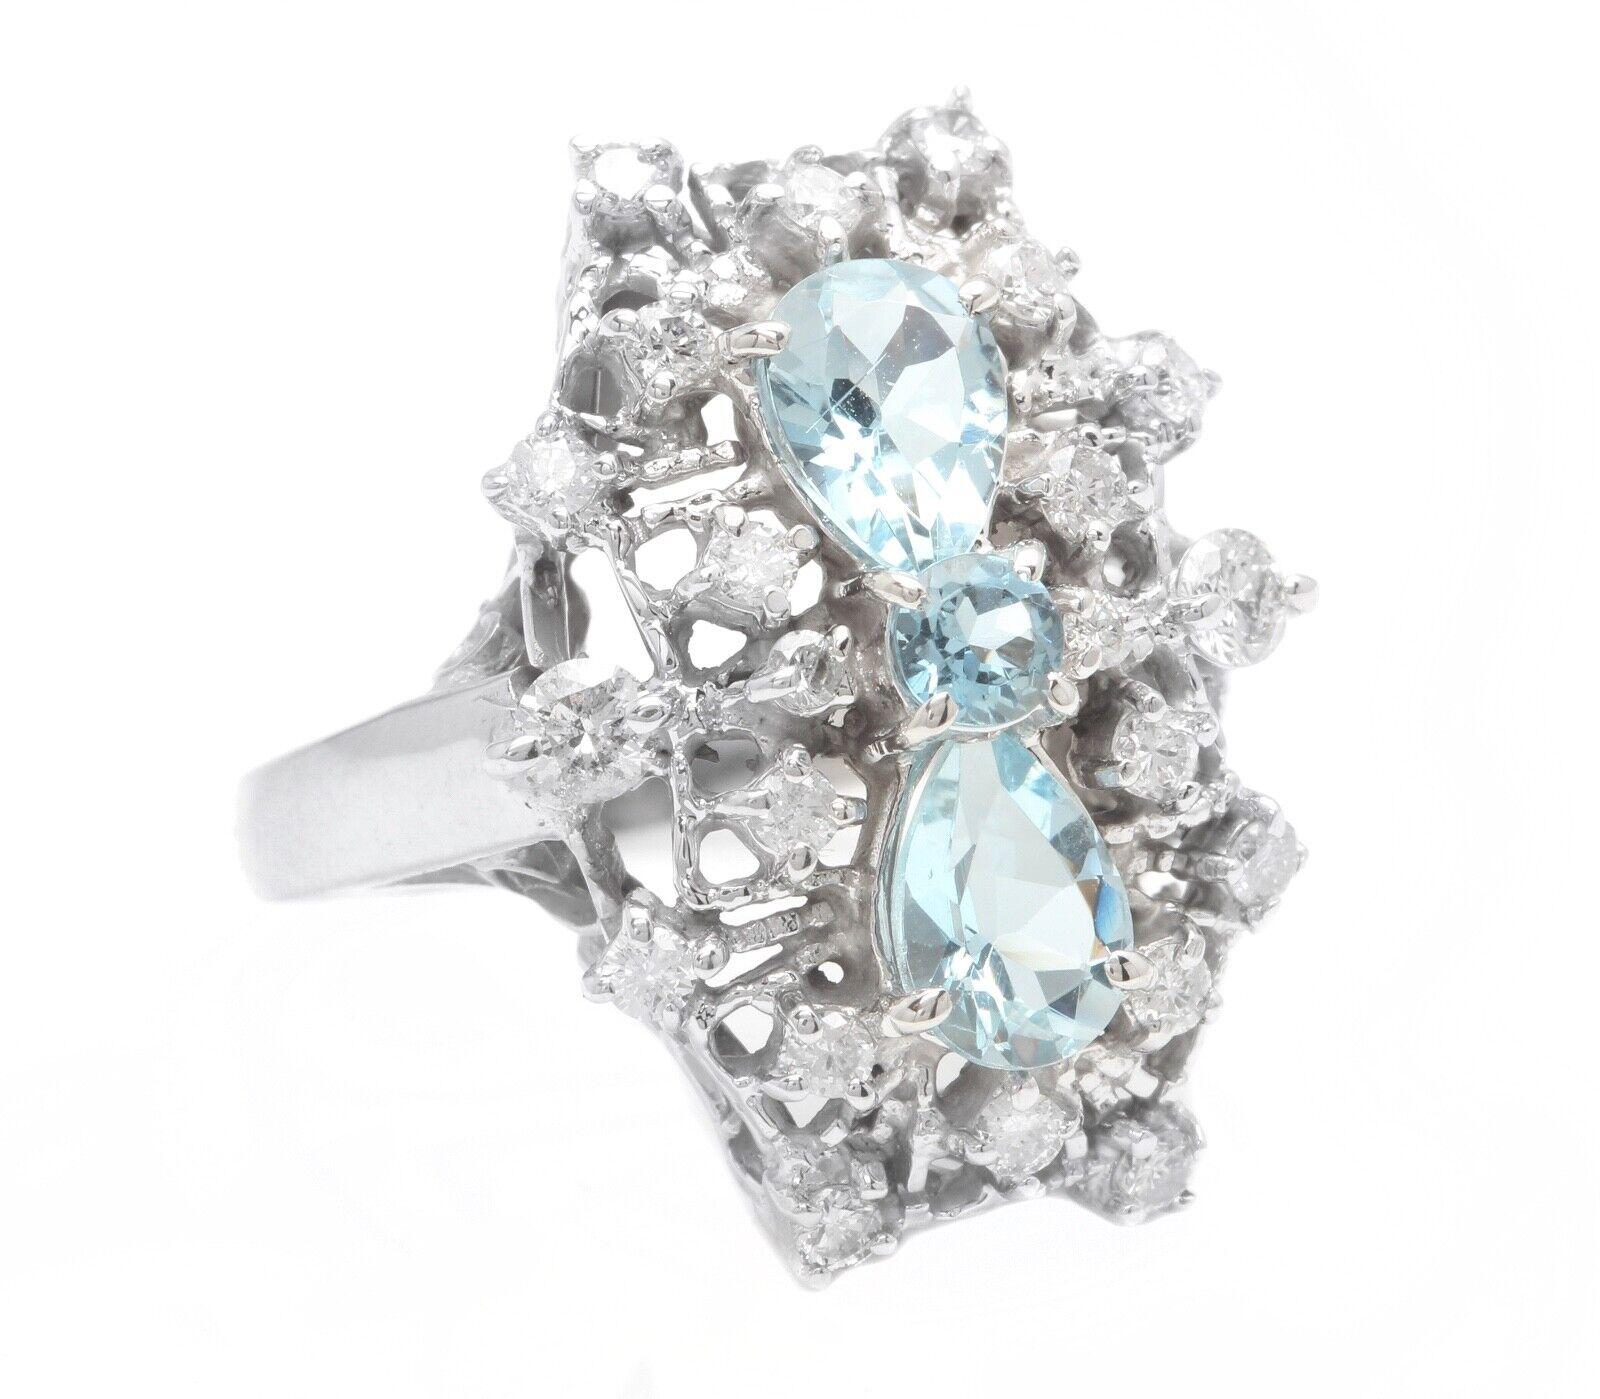 1.75 Carats Natural Aquamarine and Diamond 14K Solid White Gold Ring

Suggested Replacement Value $5,500.00

Total Natural Aquamarine Weight is: Approx. 1.25 Carats 
   
Natural Round Diamonds Weight: Approx. 0.50 Carats (color G-H / Clarity